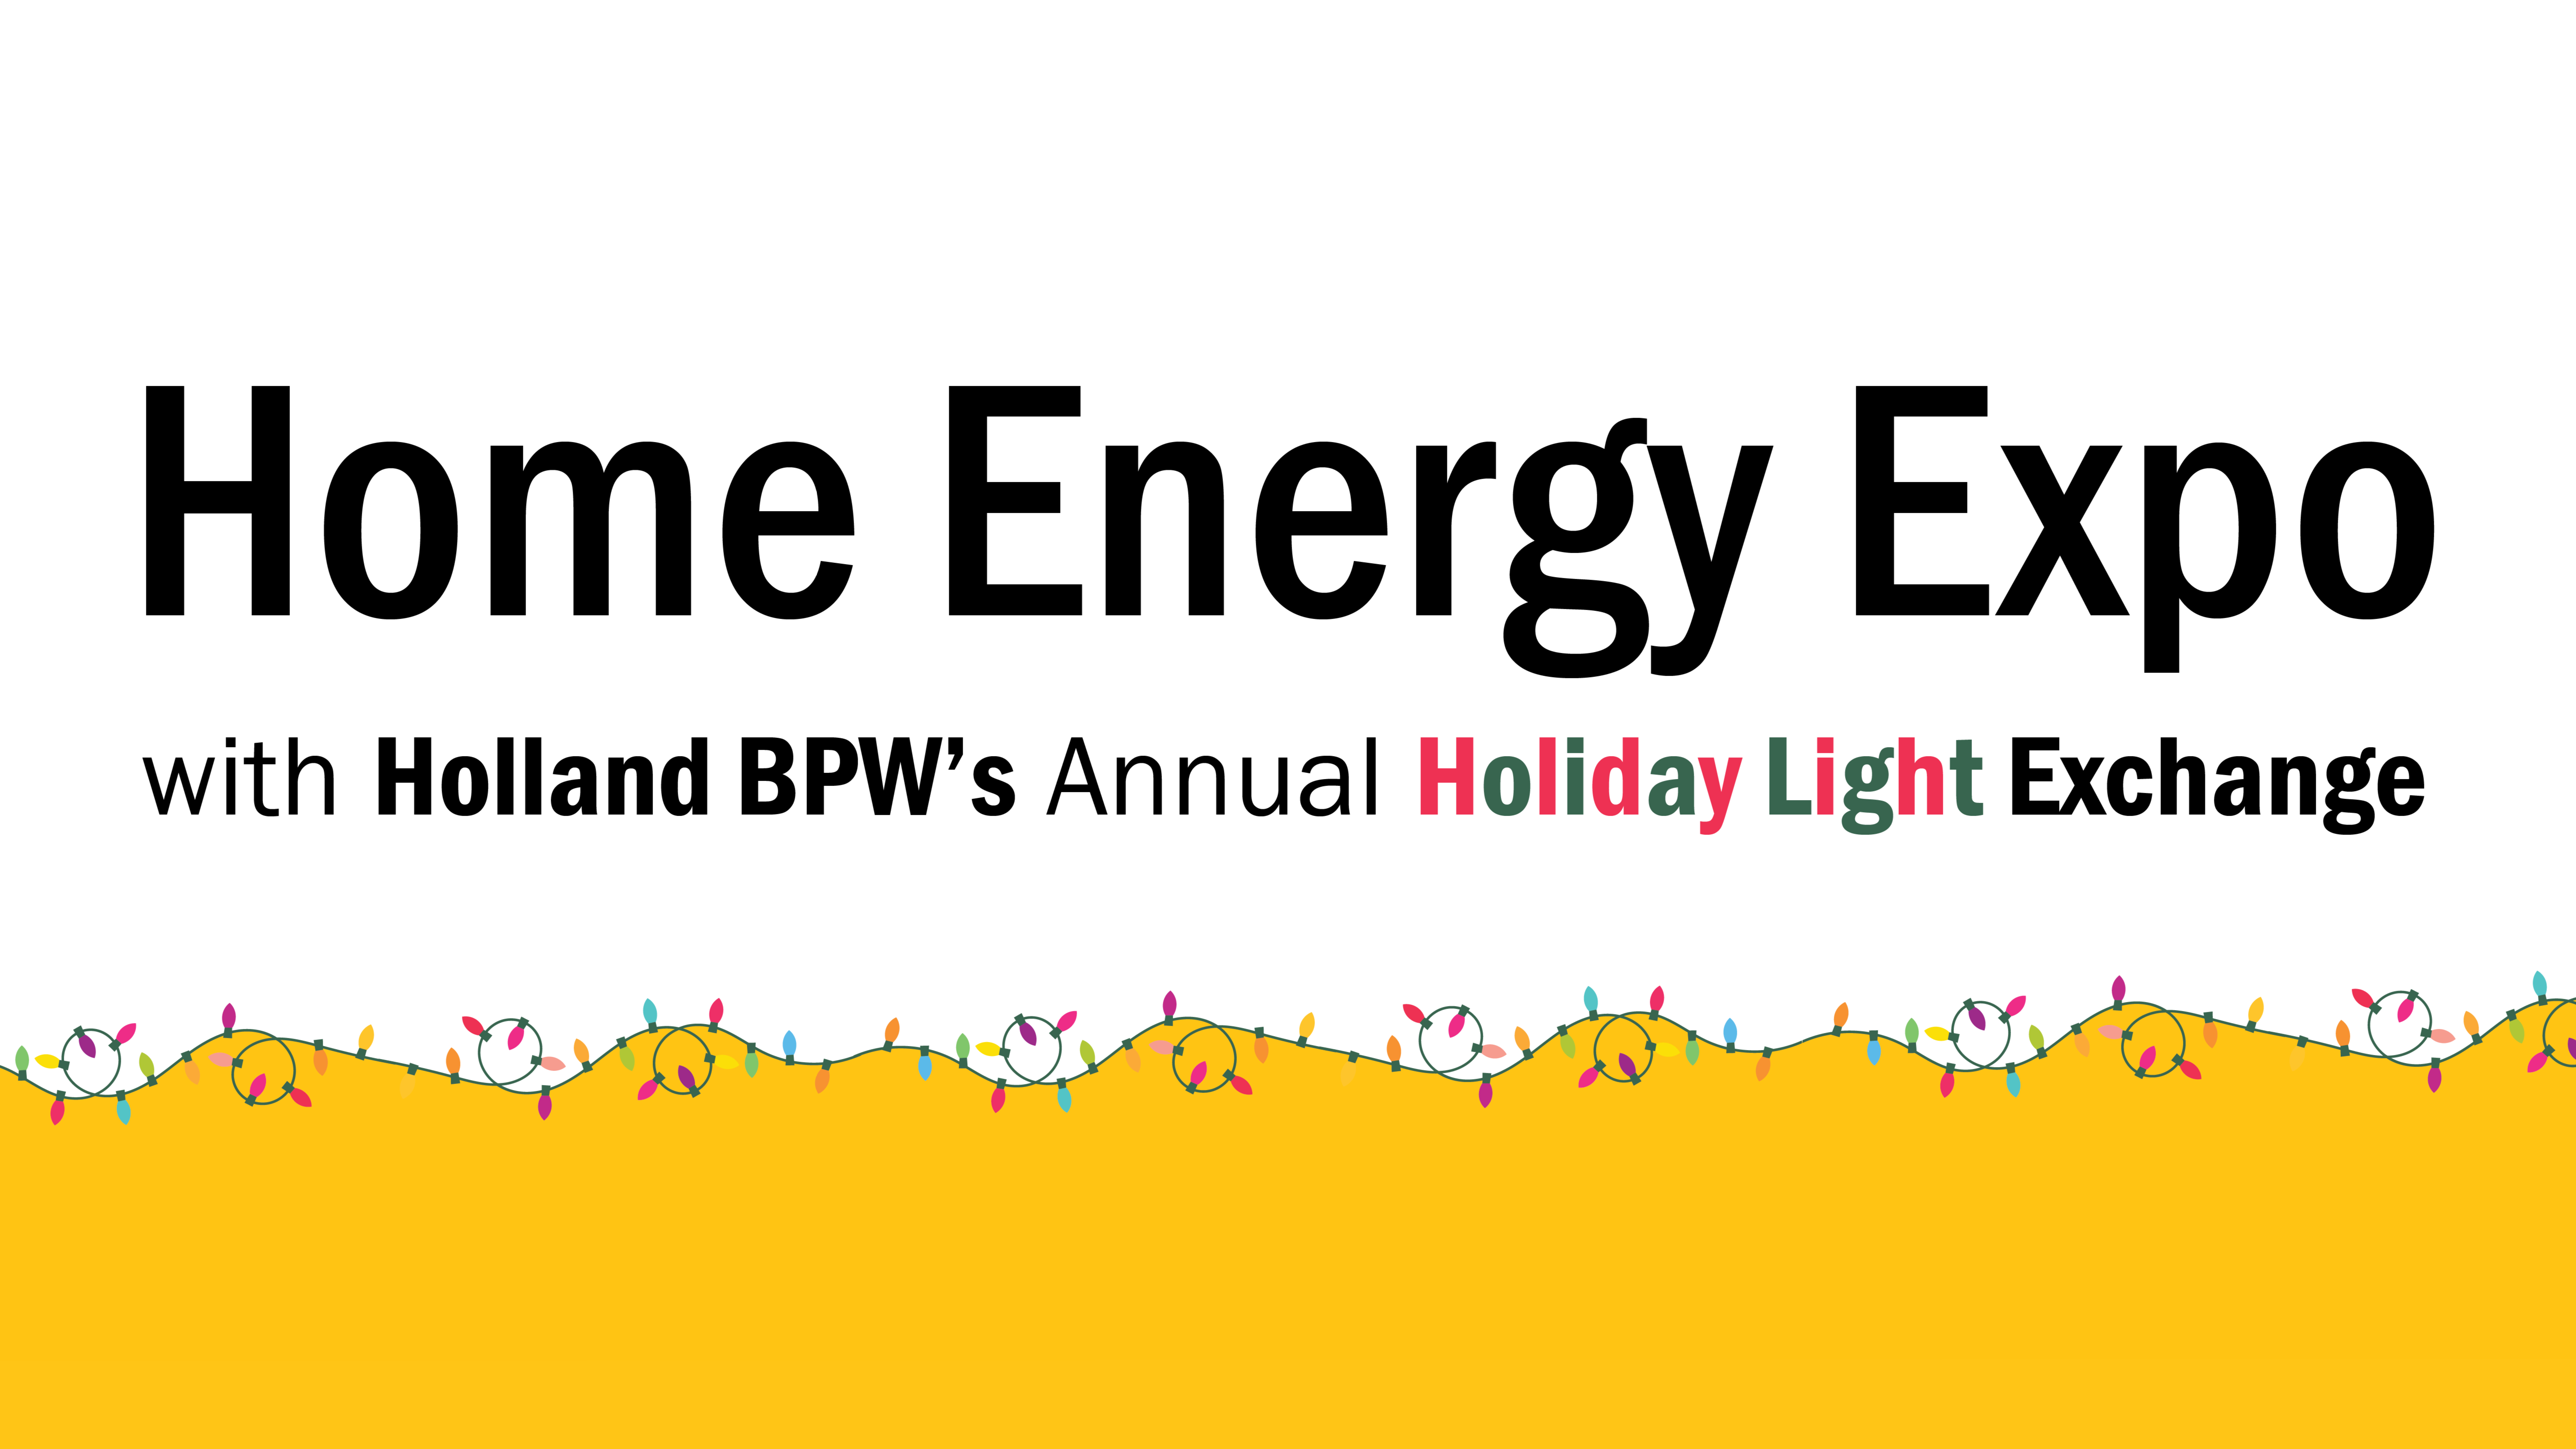 Home Energy Expo with Holland BPW's Annual Light Exchange. Oct 26 l Holland Civic Center